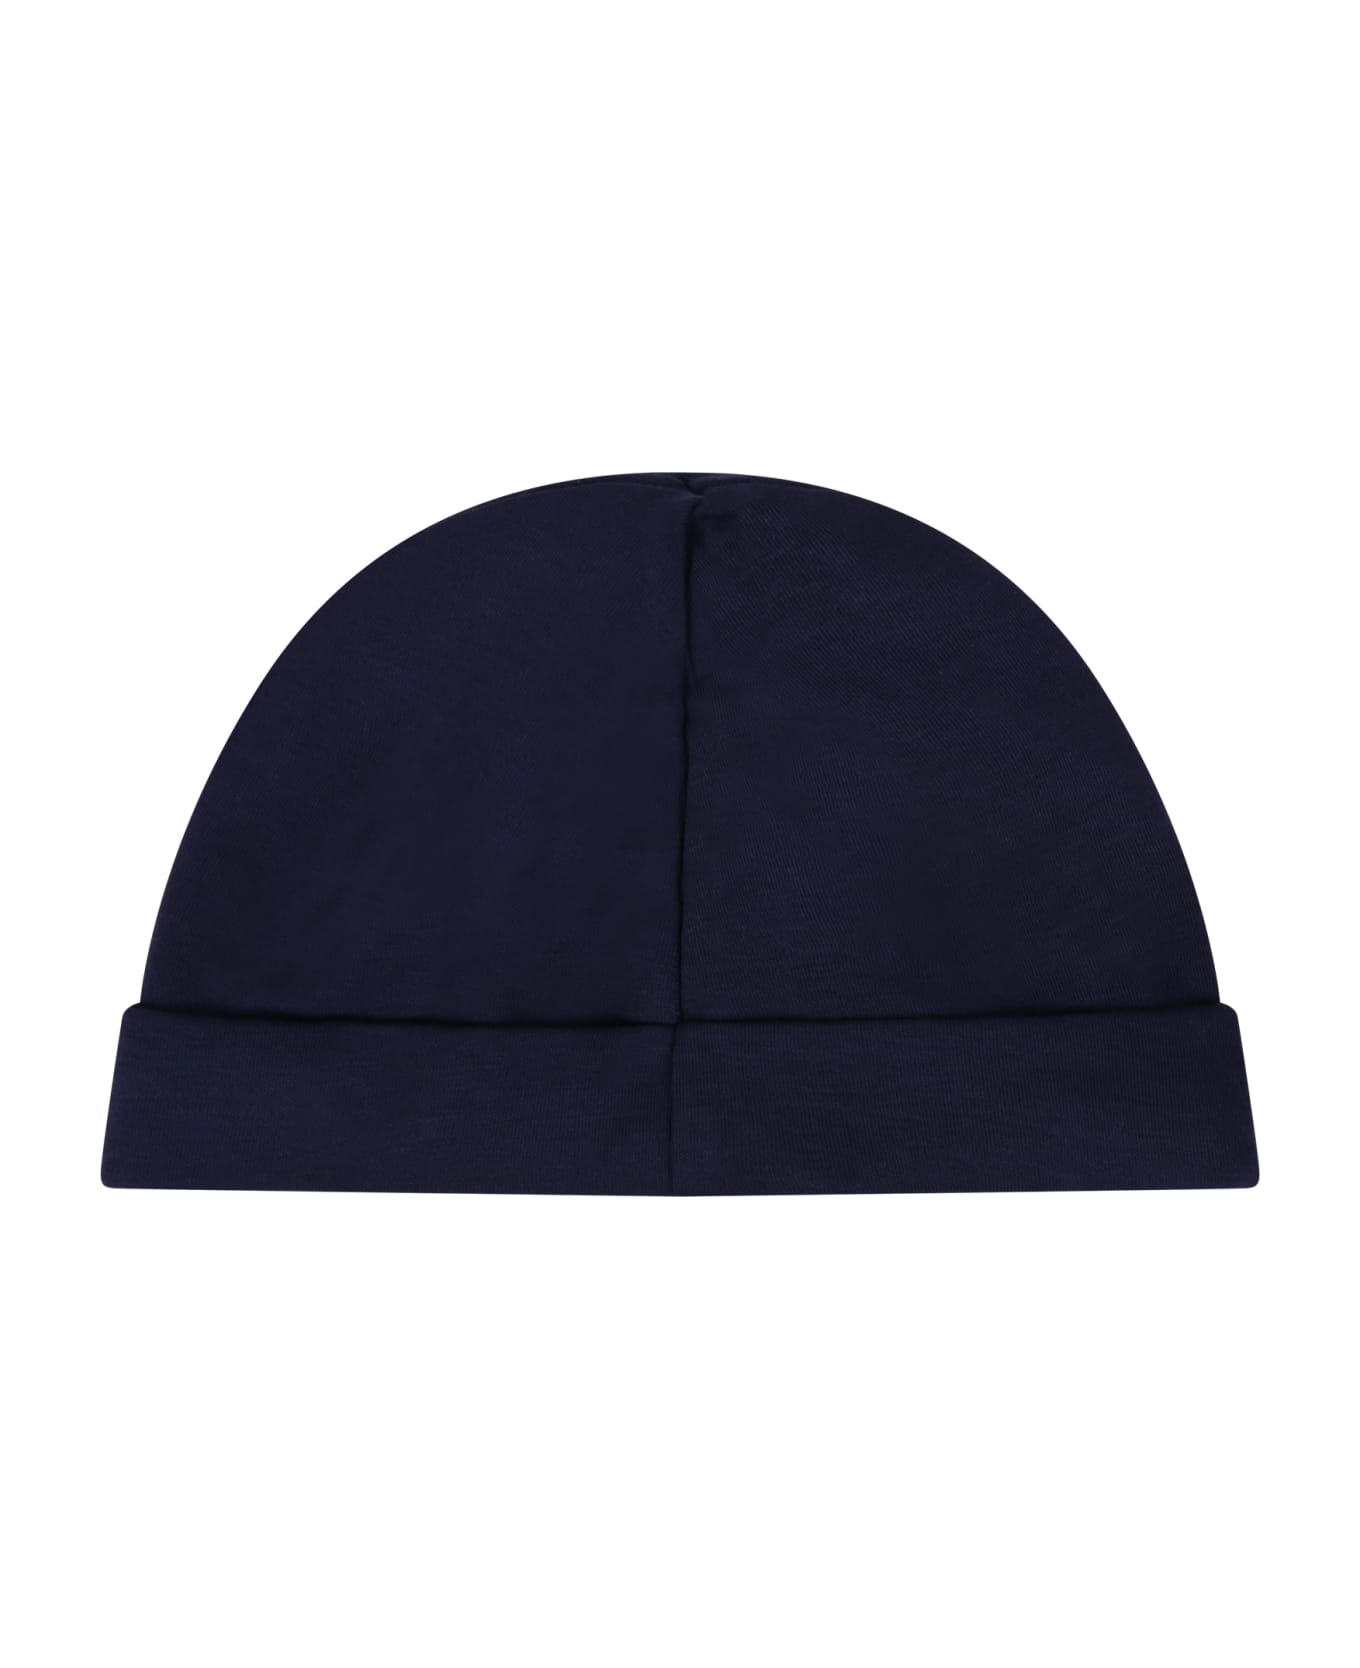 Ralph Lauren Blue Hat For Babyboy With Pony Logo - Blue